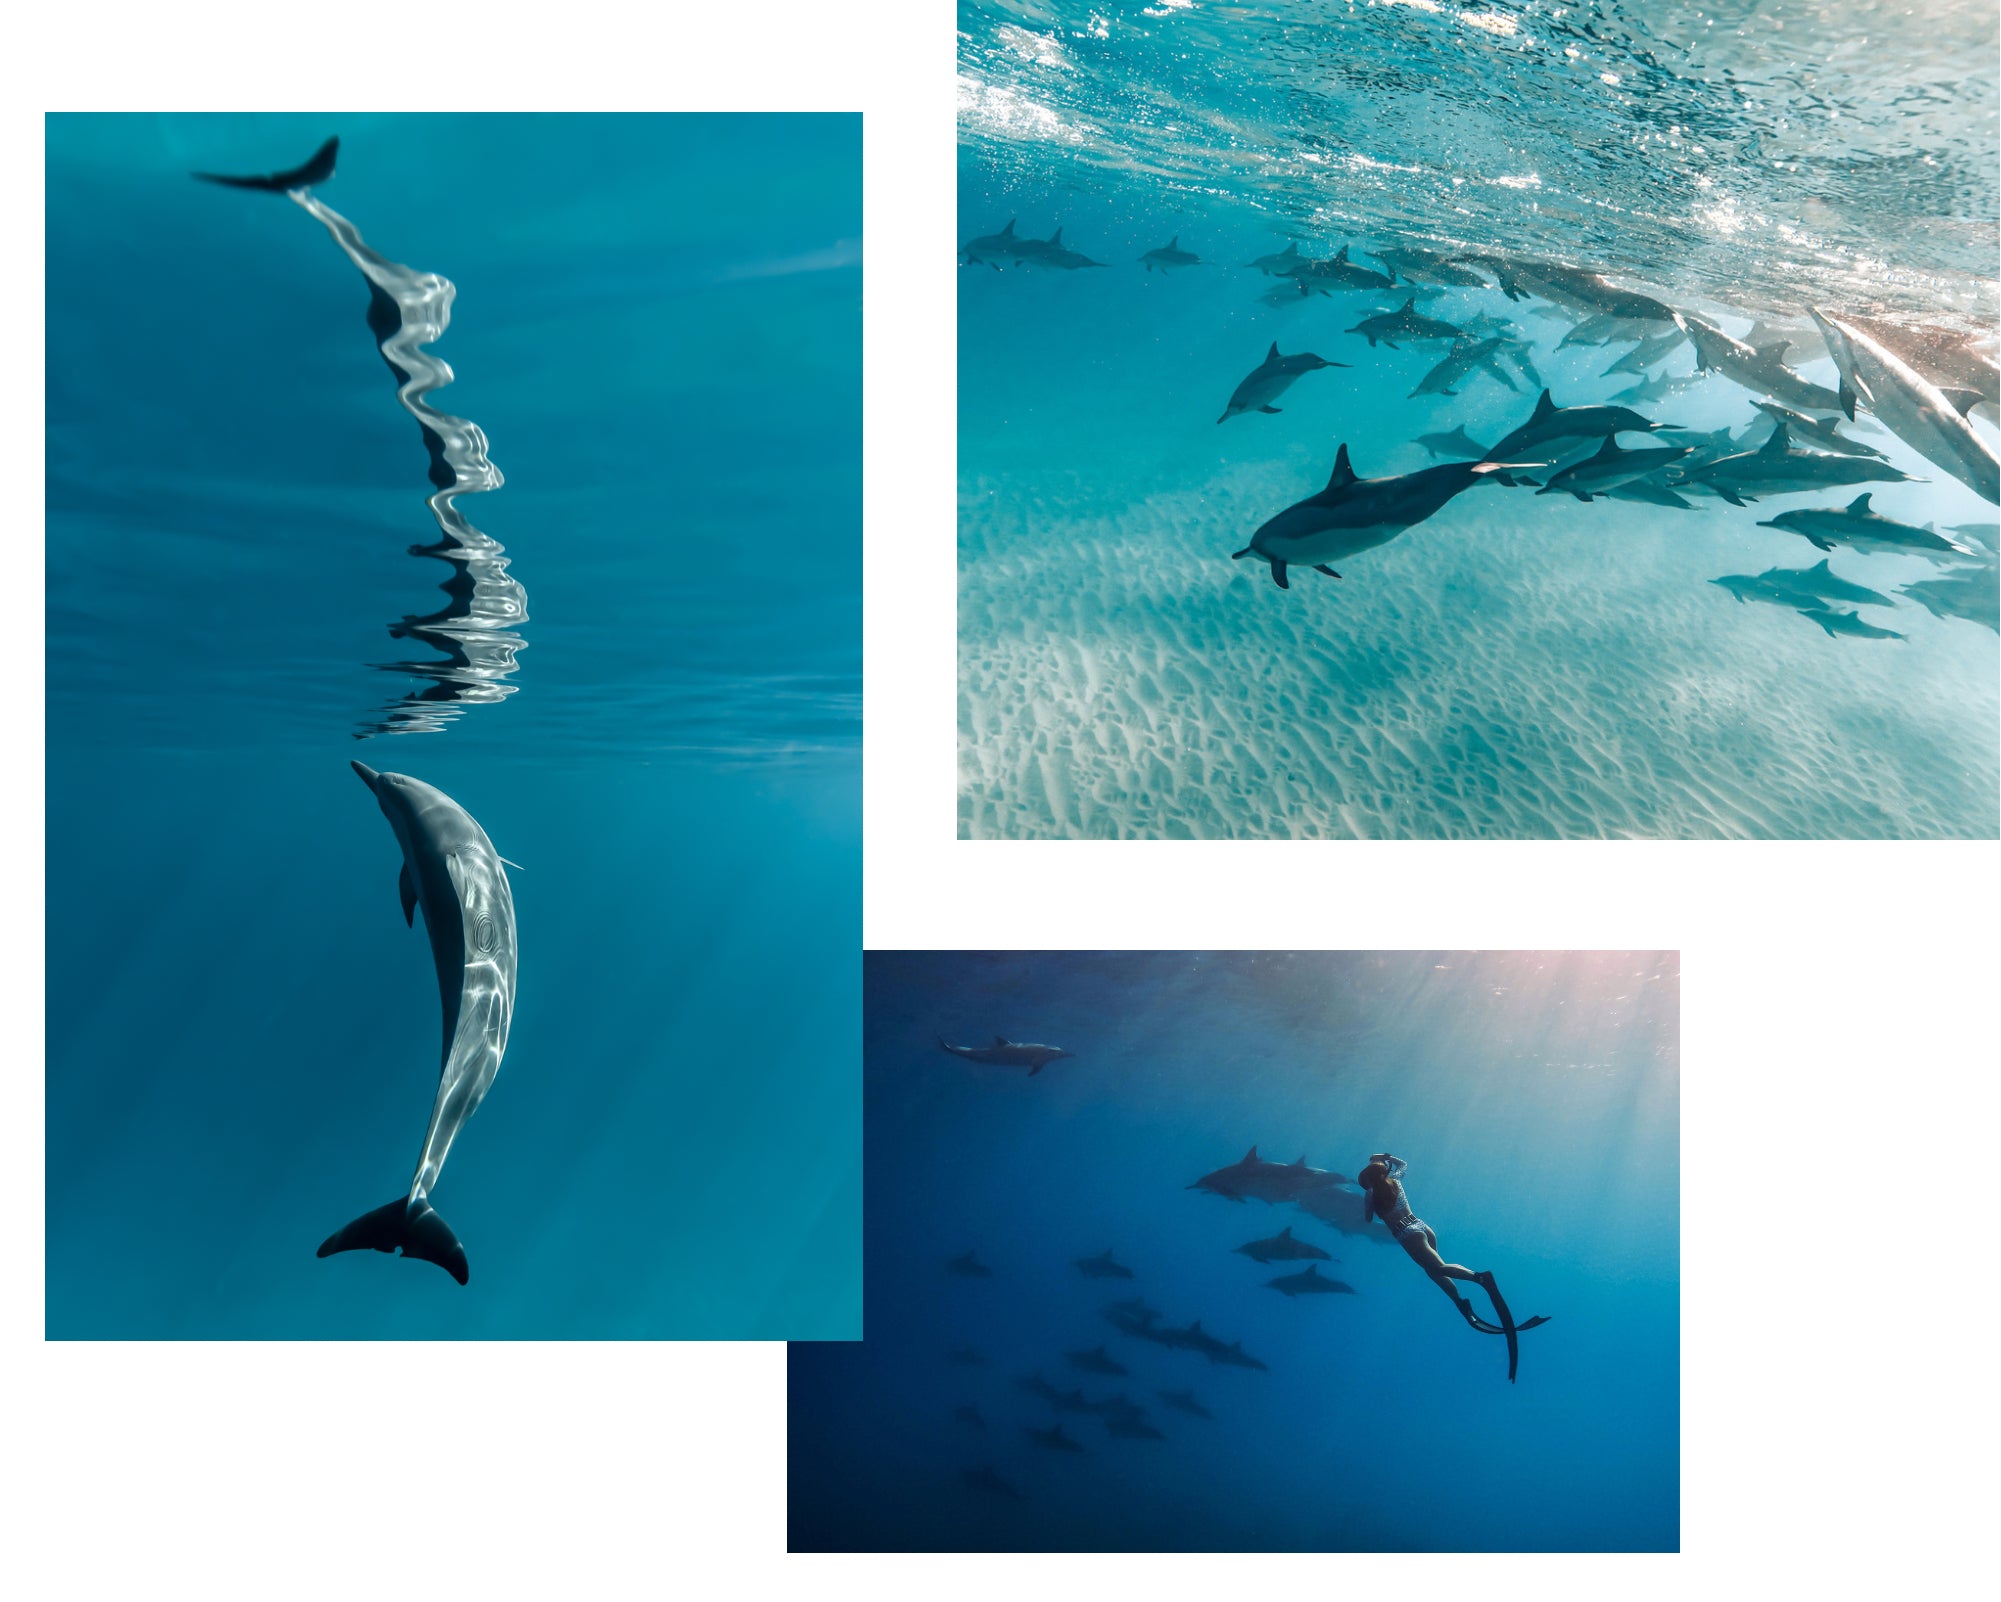 Eri Ocean's underwater photography of dolphins in turquoise waters.